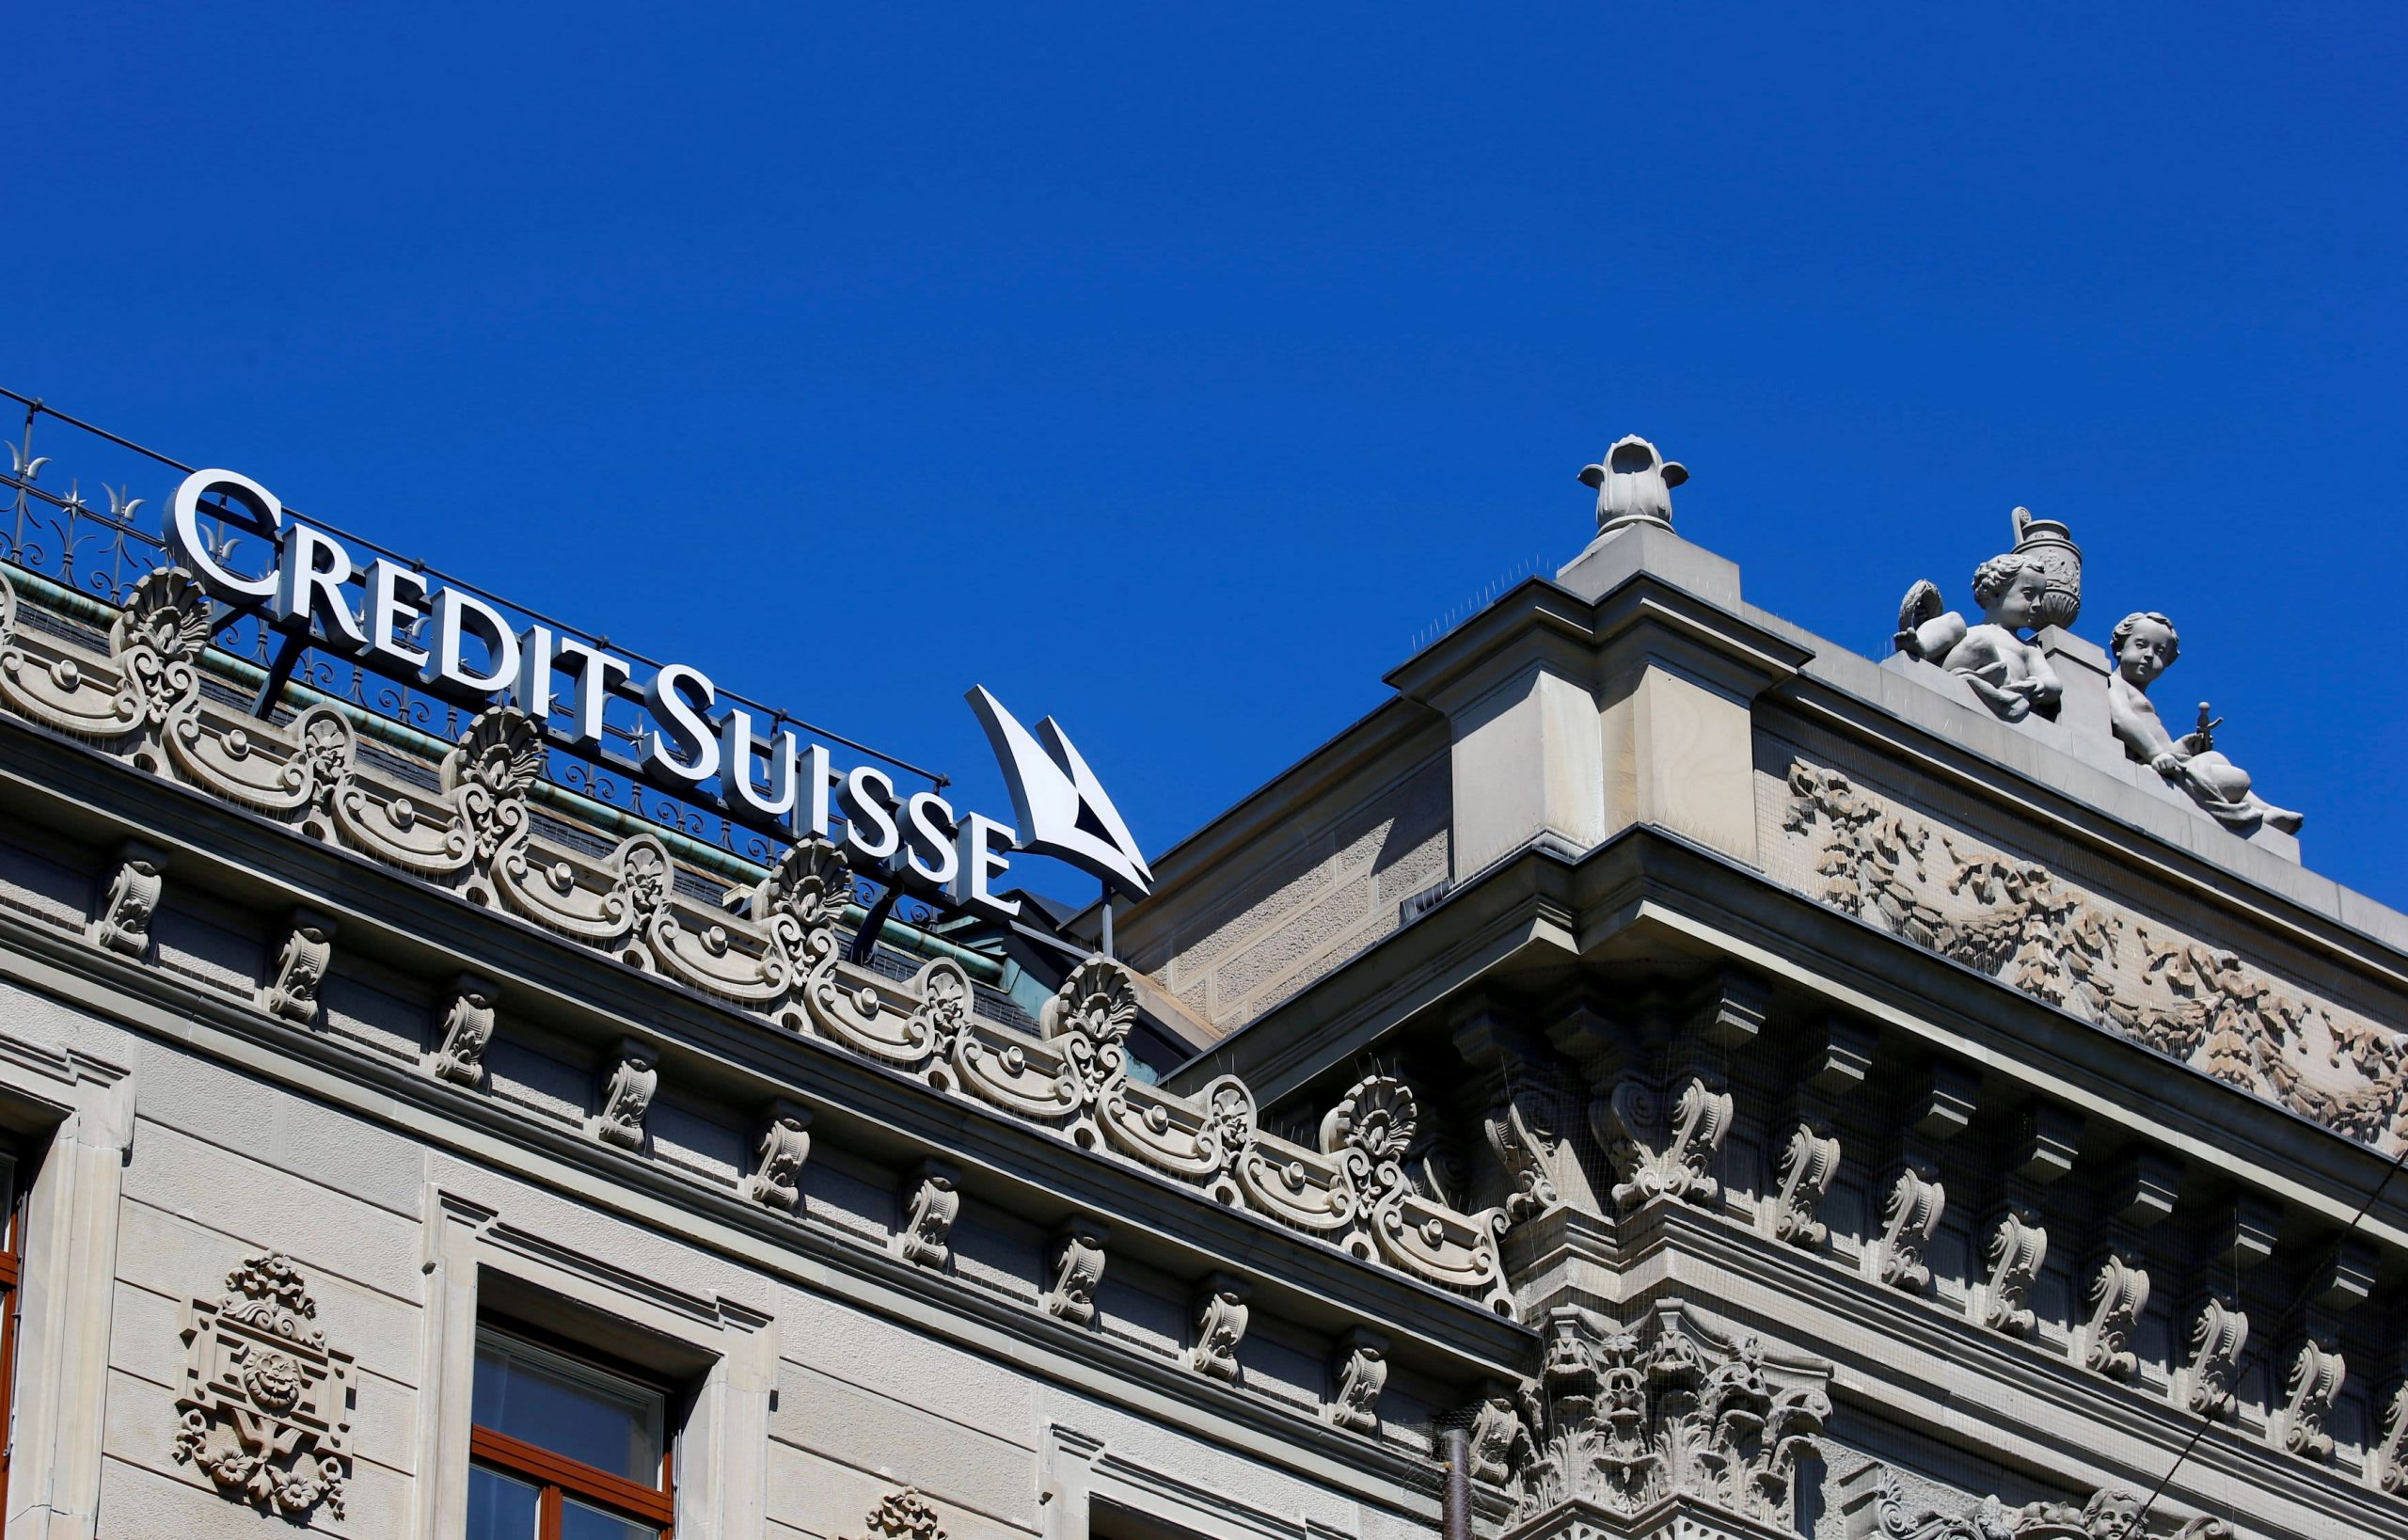 Credit Suisse faces fresh scrutiny over culture after client data leaks